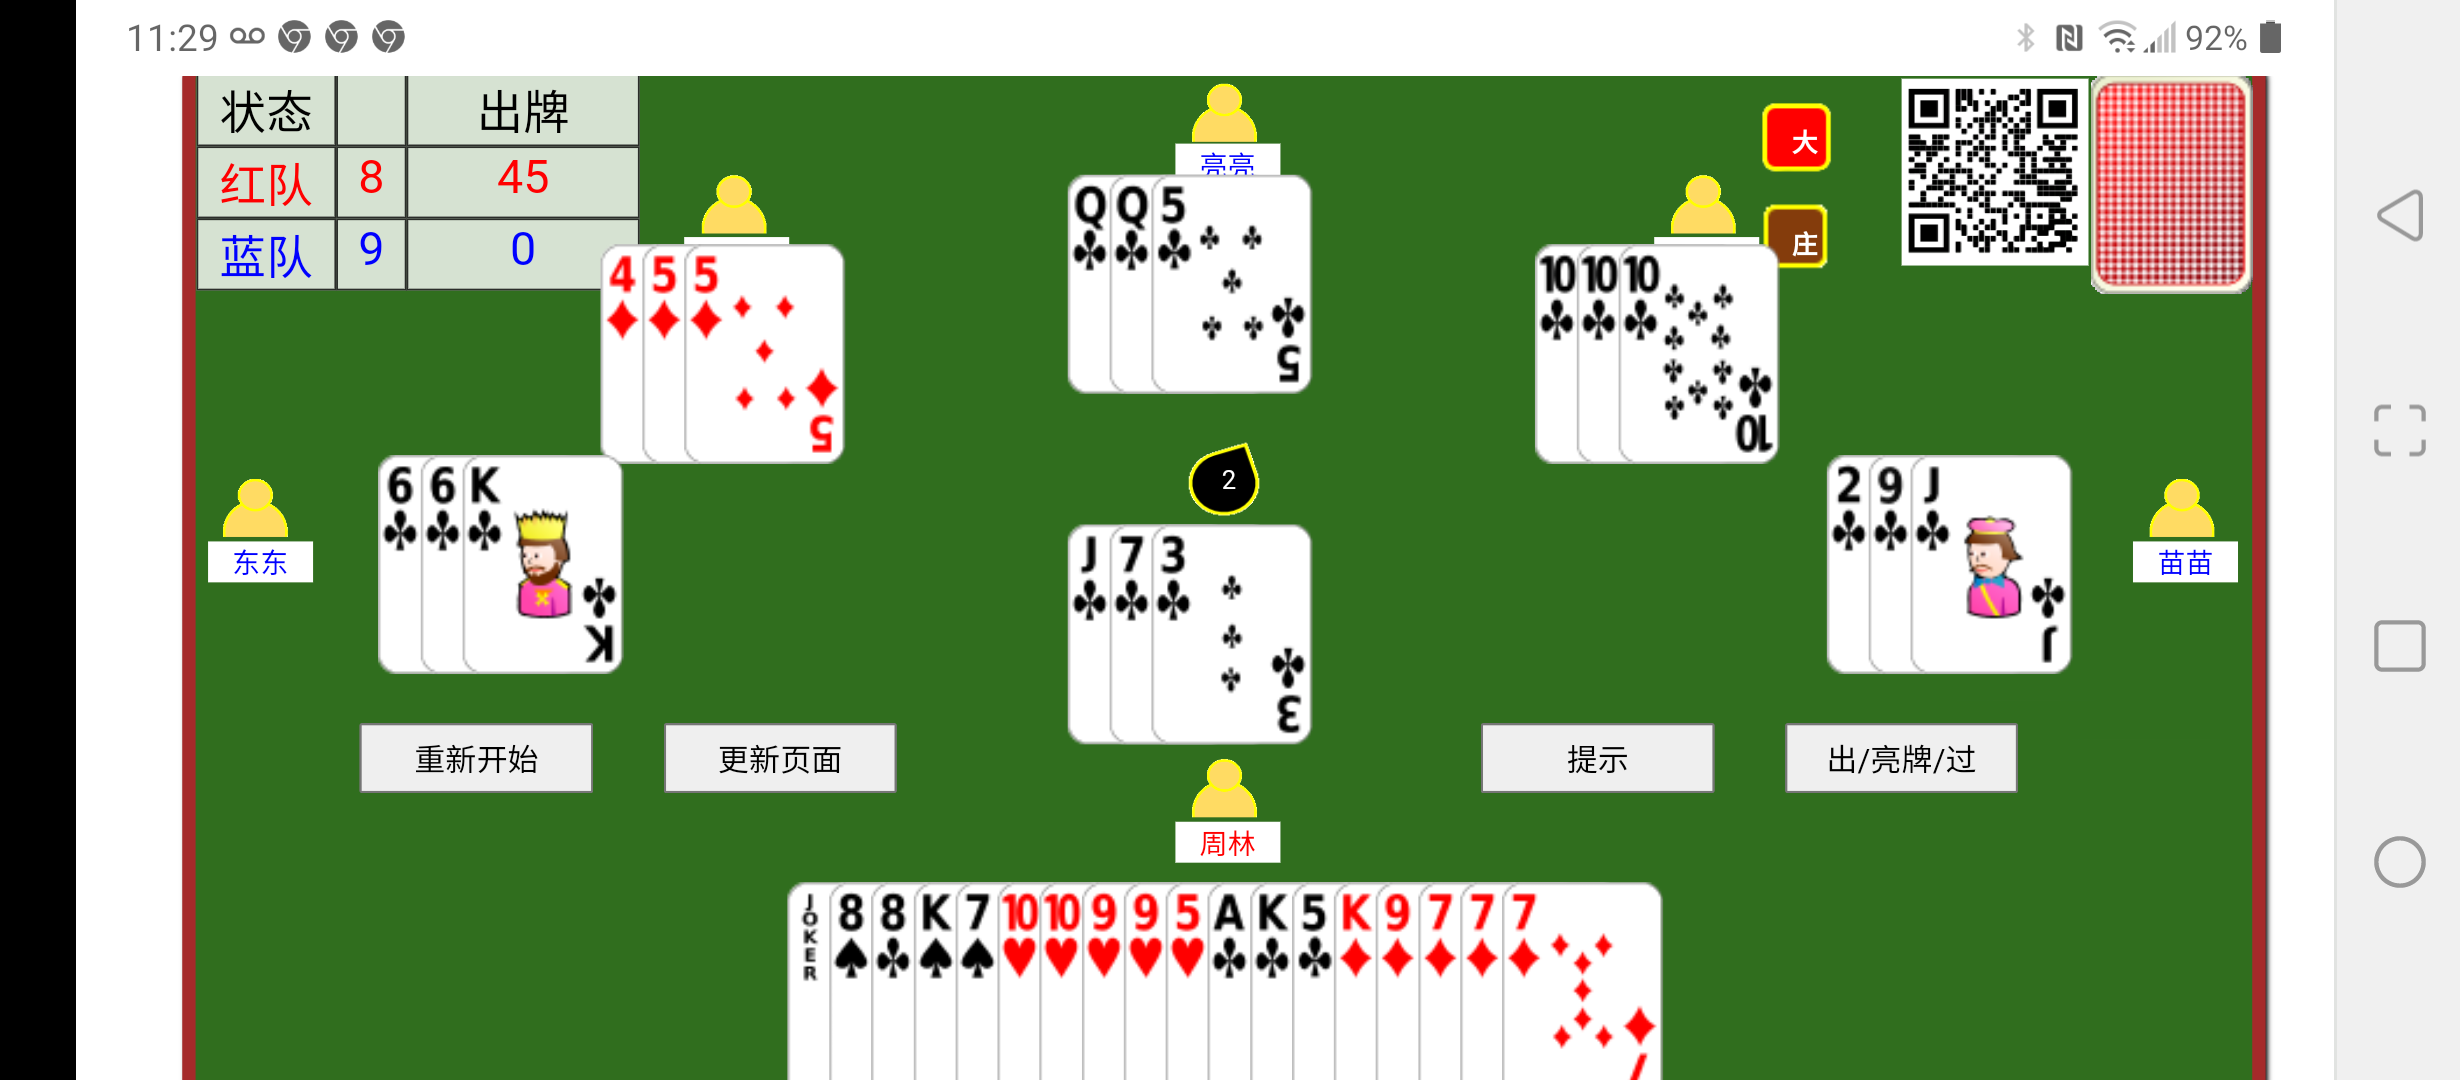 html5 tractor card game Screenshot_20220122-112923.png